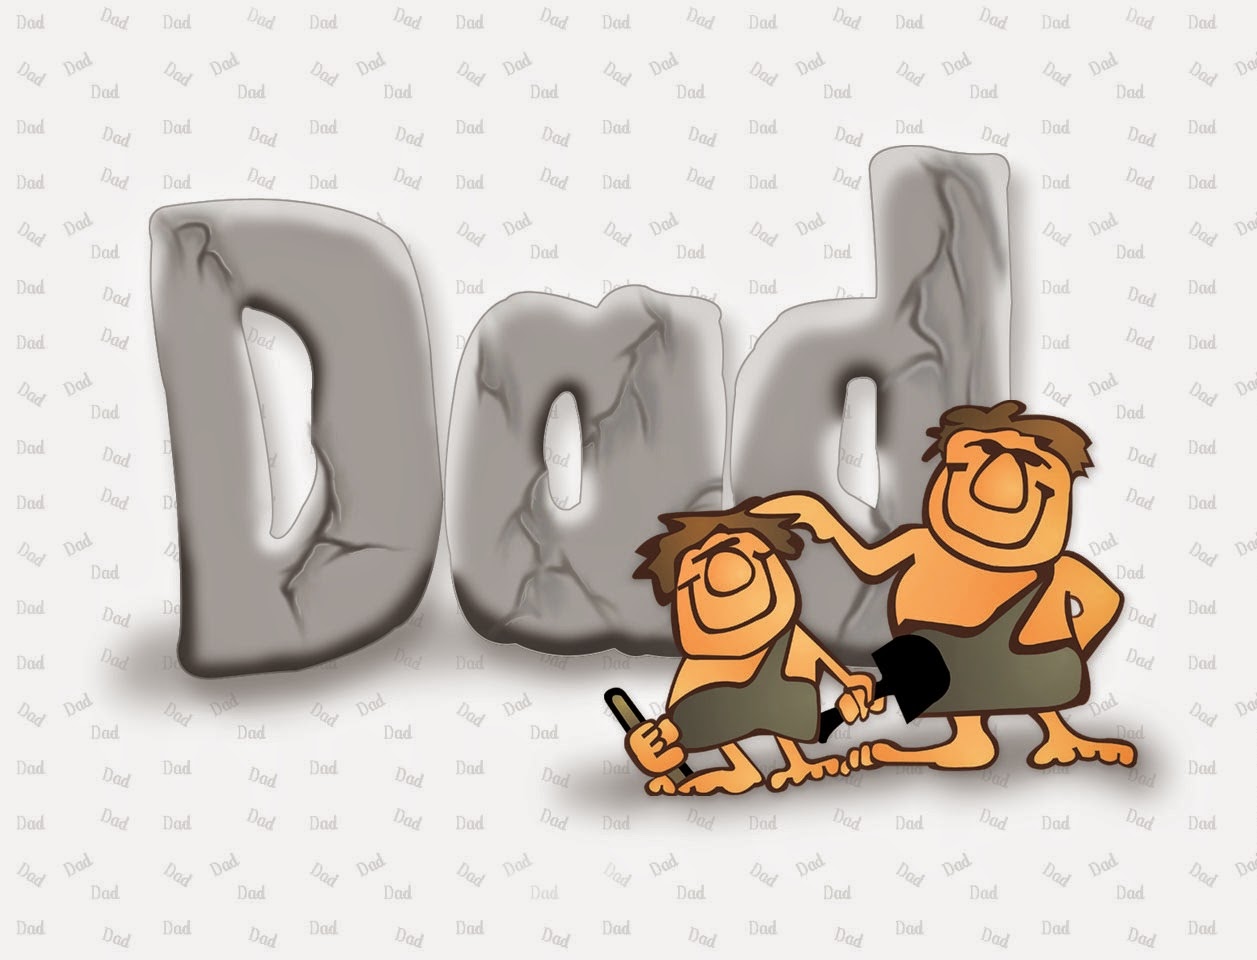 Missing Beats of Life: Happy Father's Day HD Wallpaper and Image